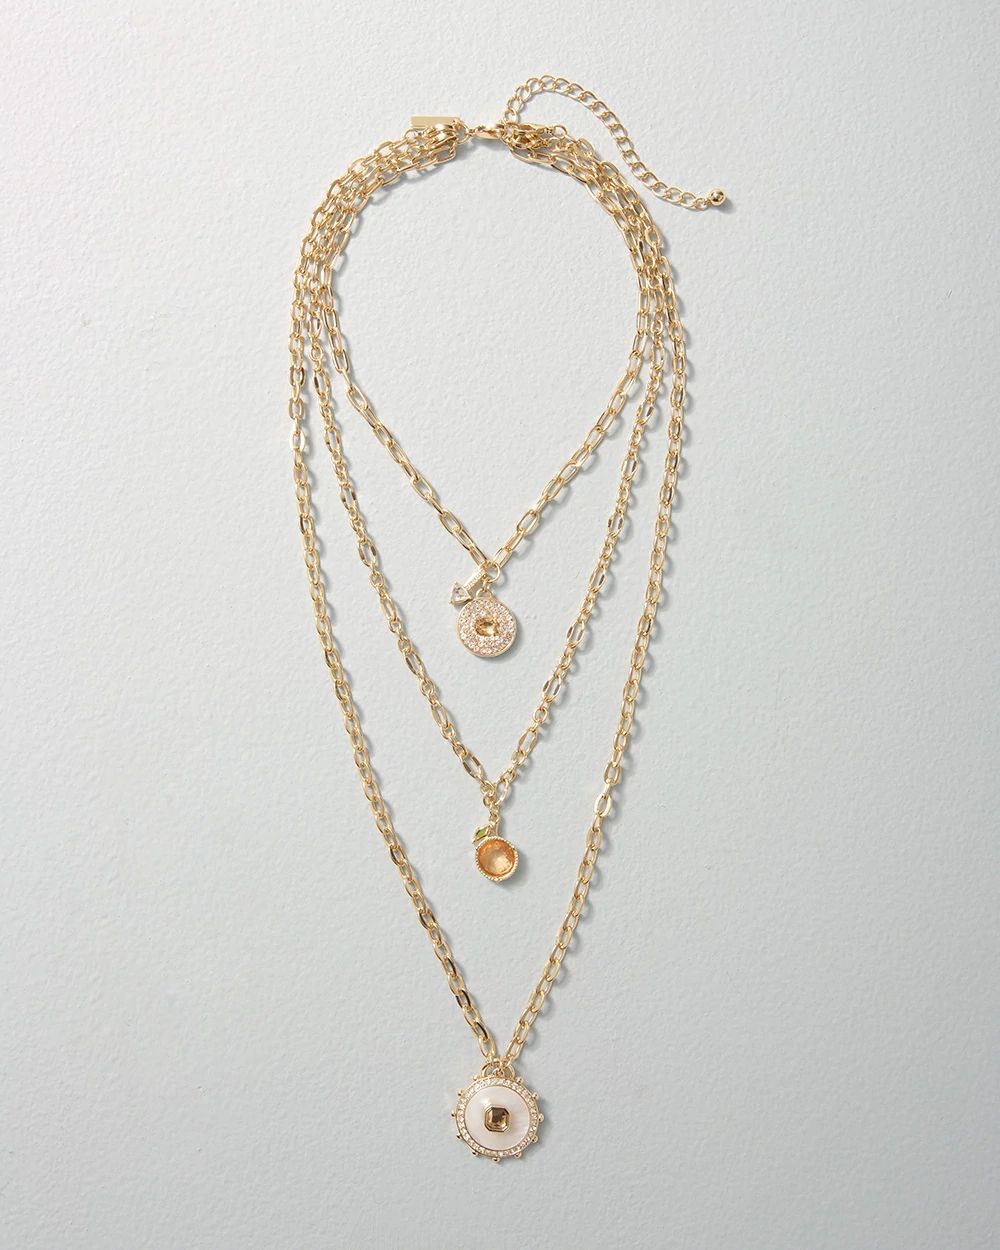 Goldtone Multi-Strand Necklace click to view larger image.